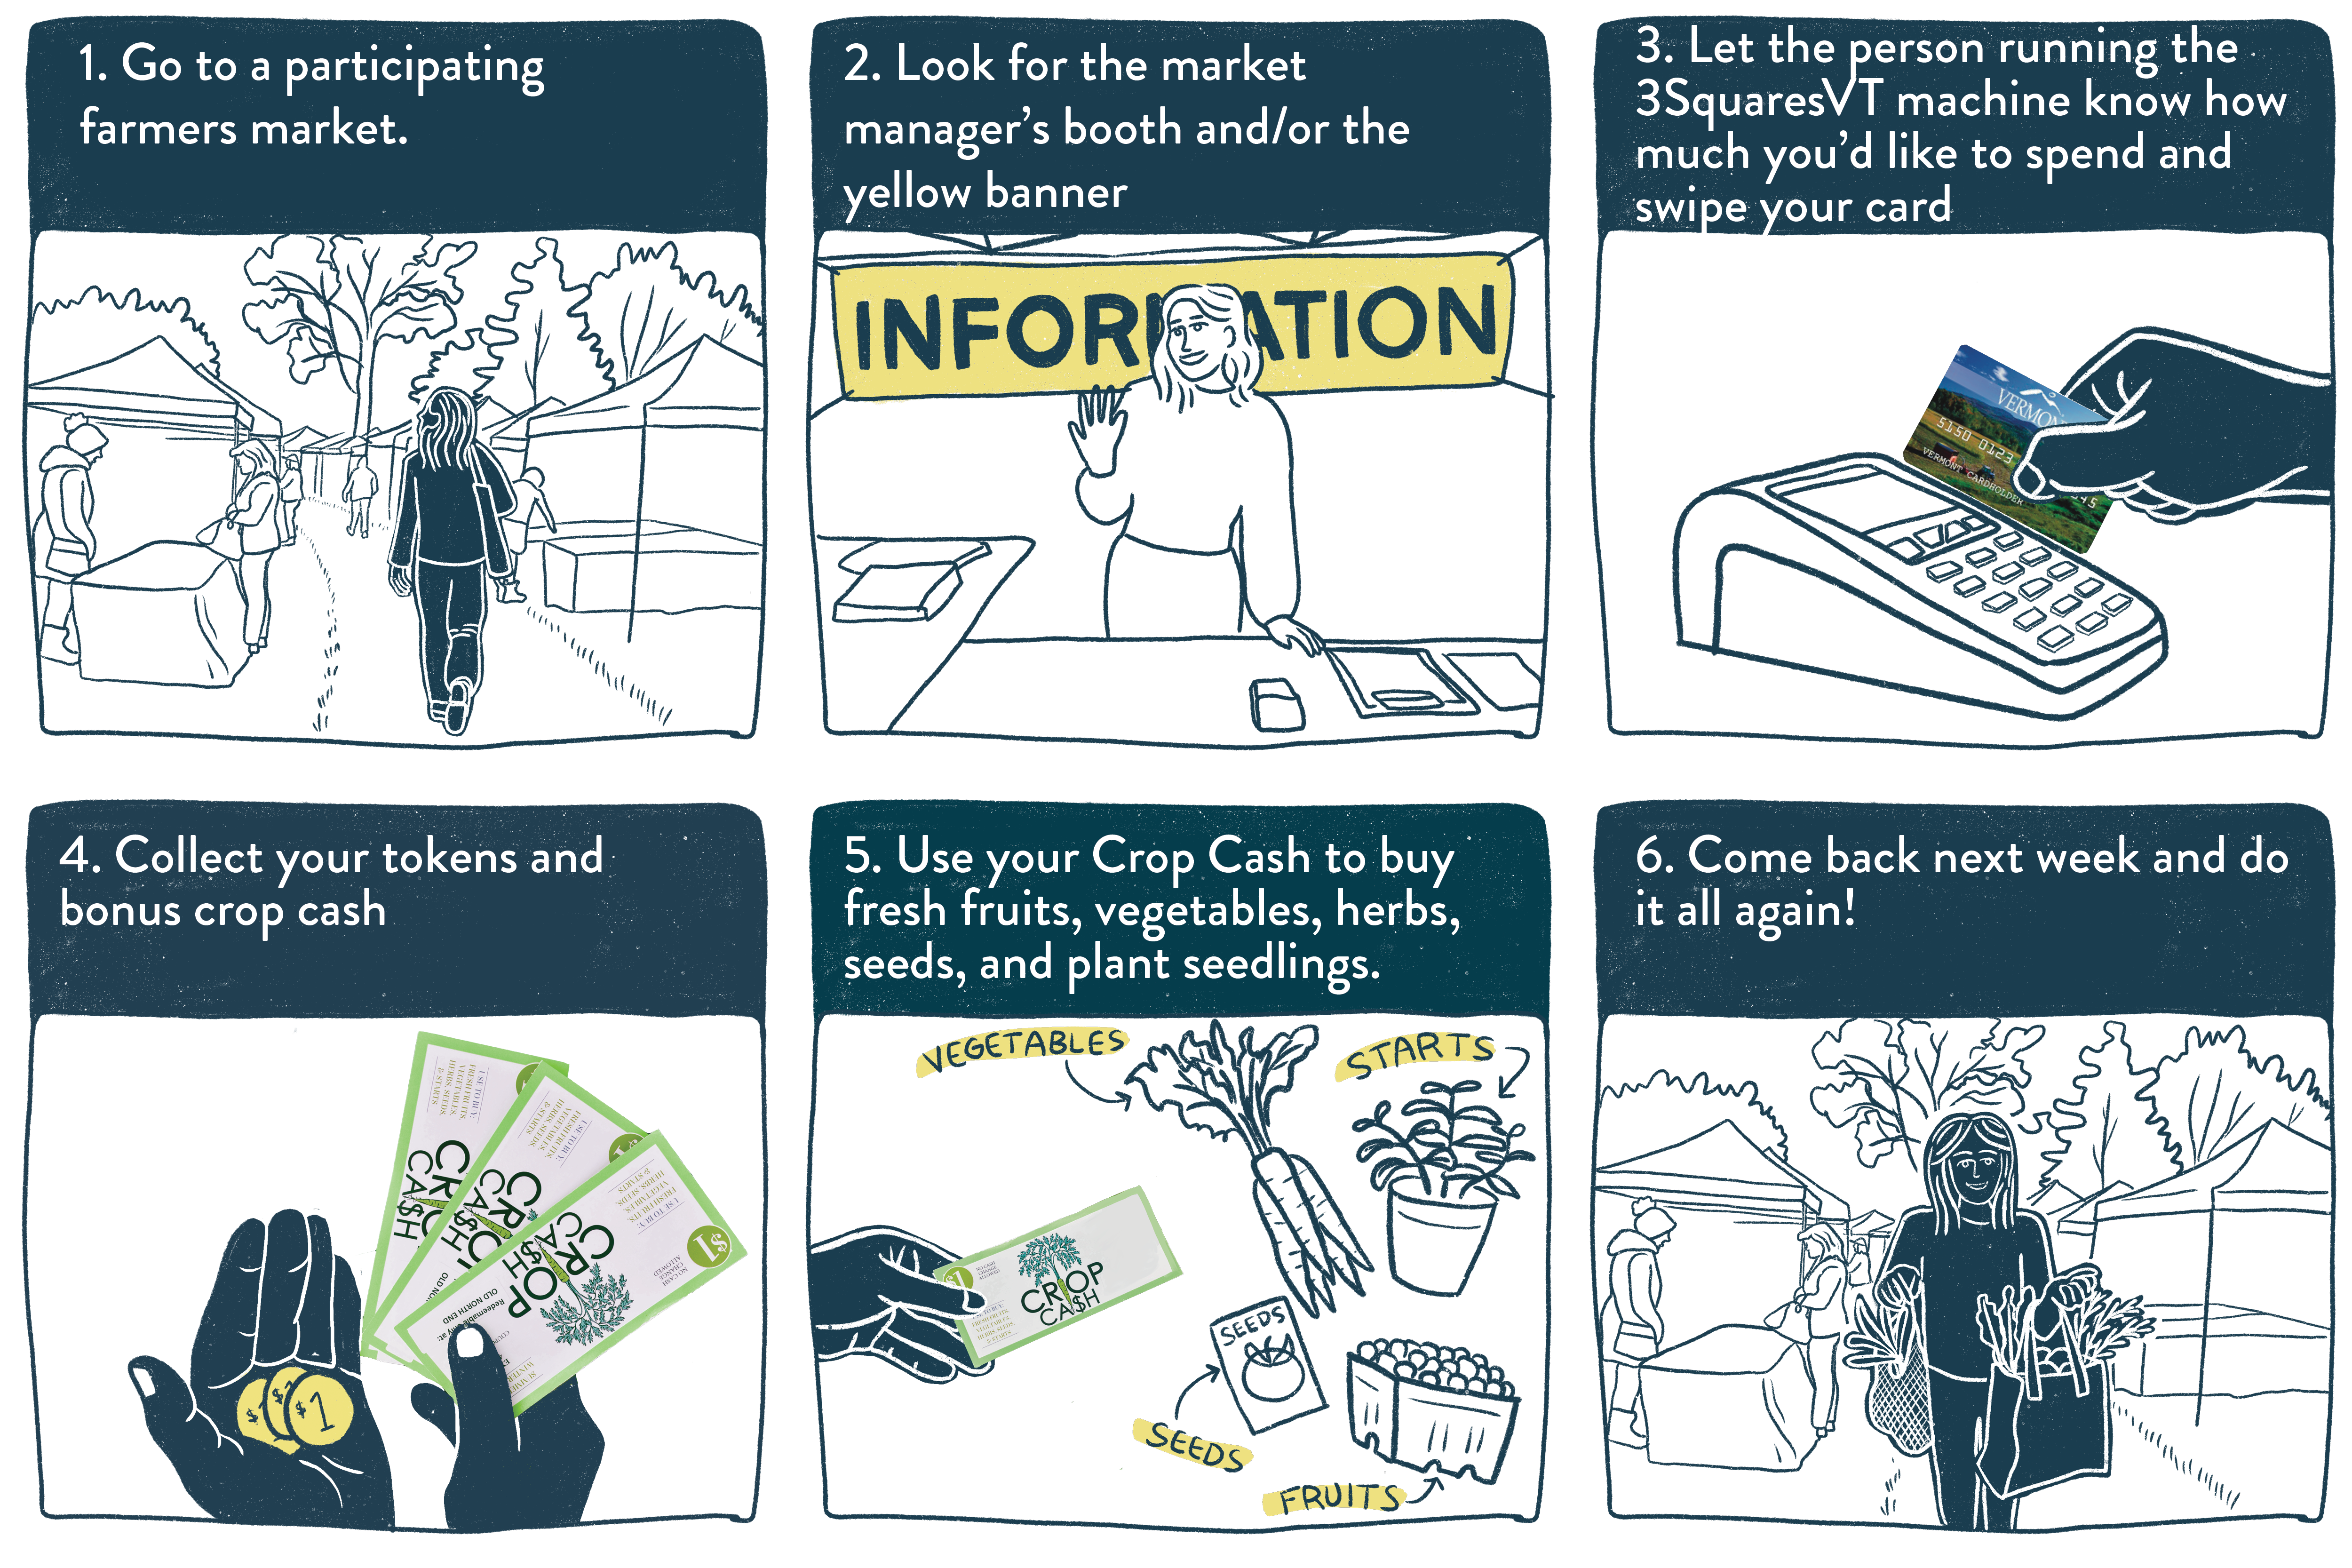 Illustrations of a person walking into a market, swiping their EBT card at the market manager's booth, and receiving Crop Cash.